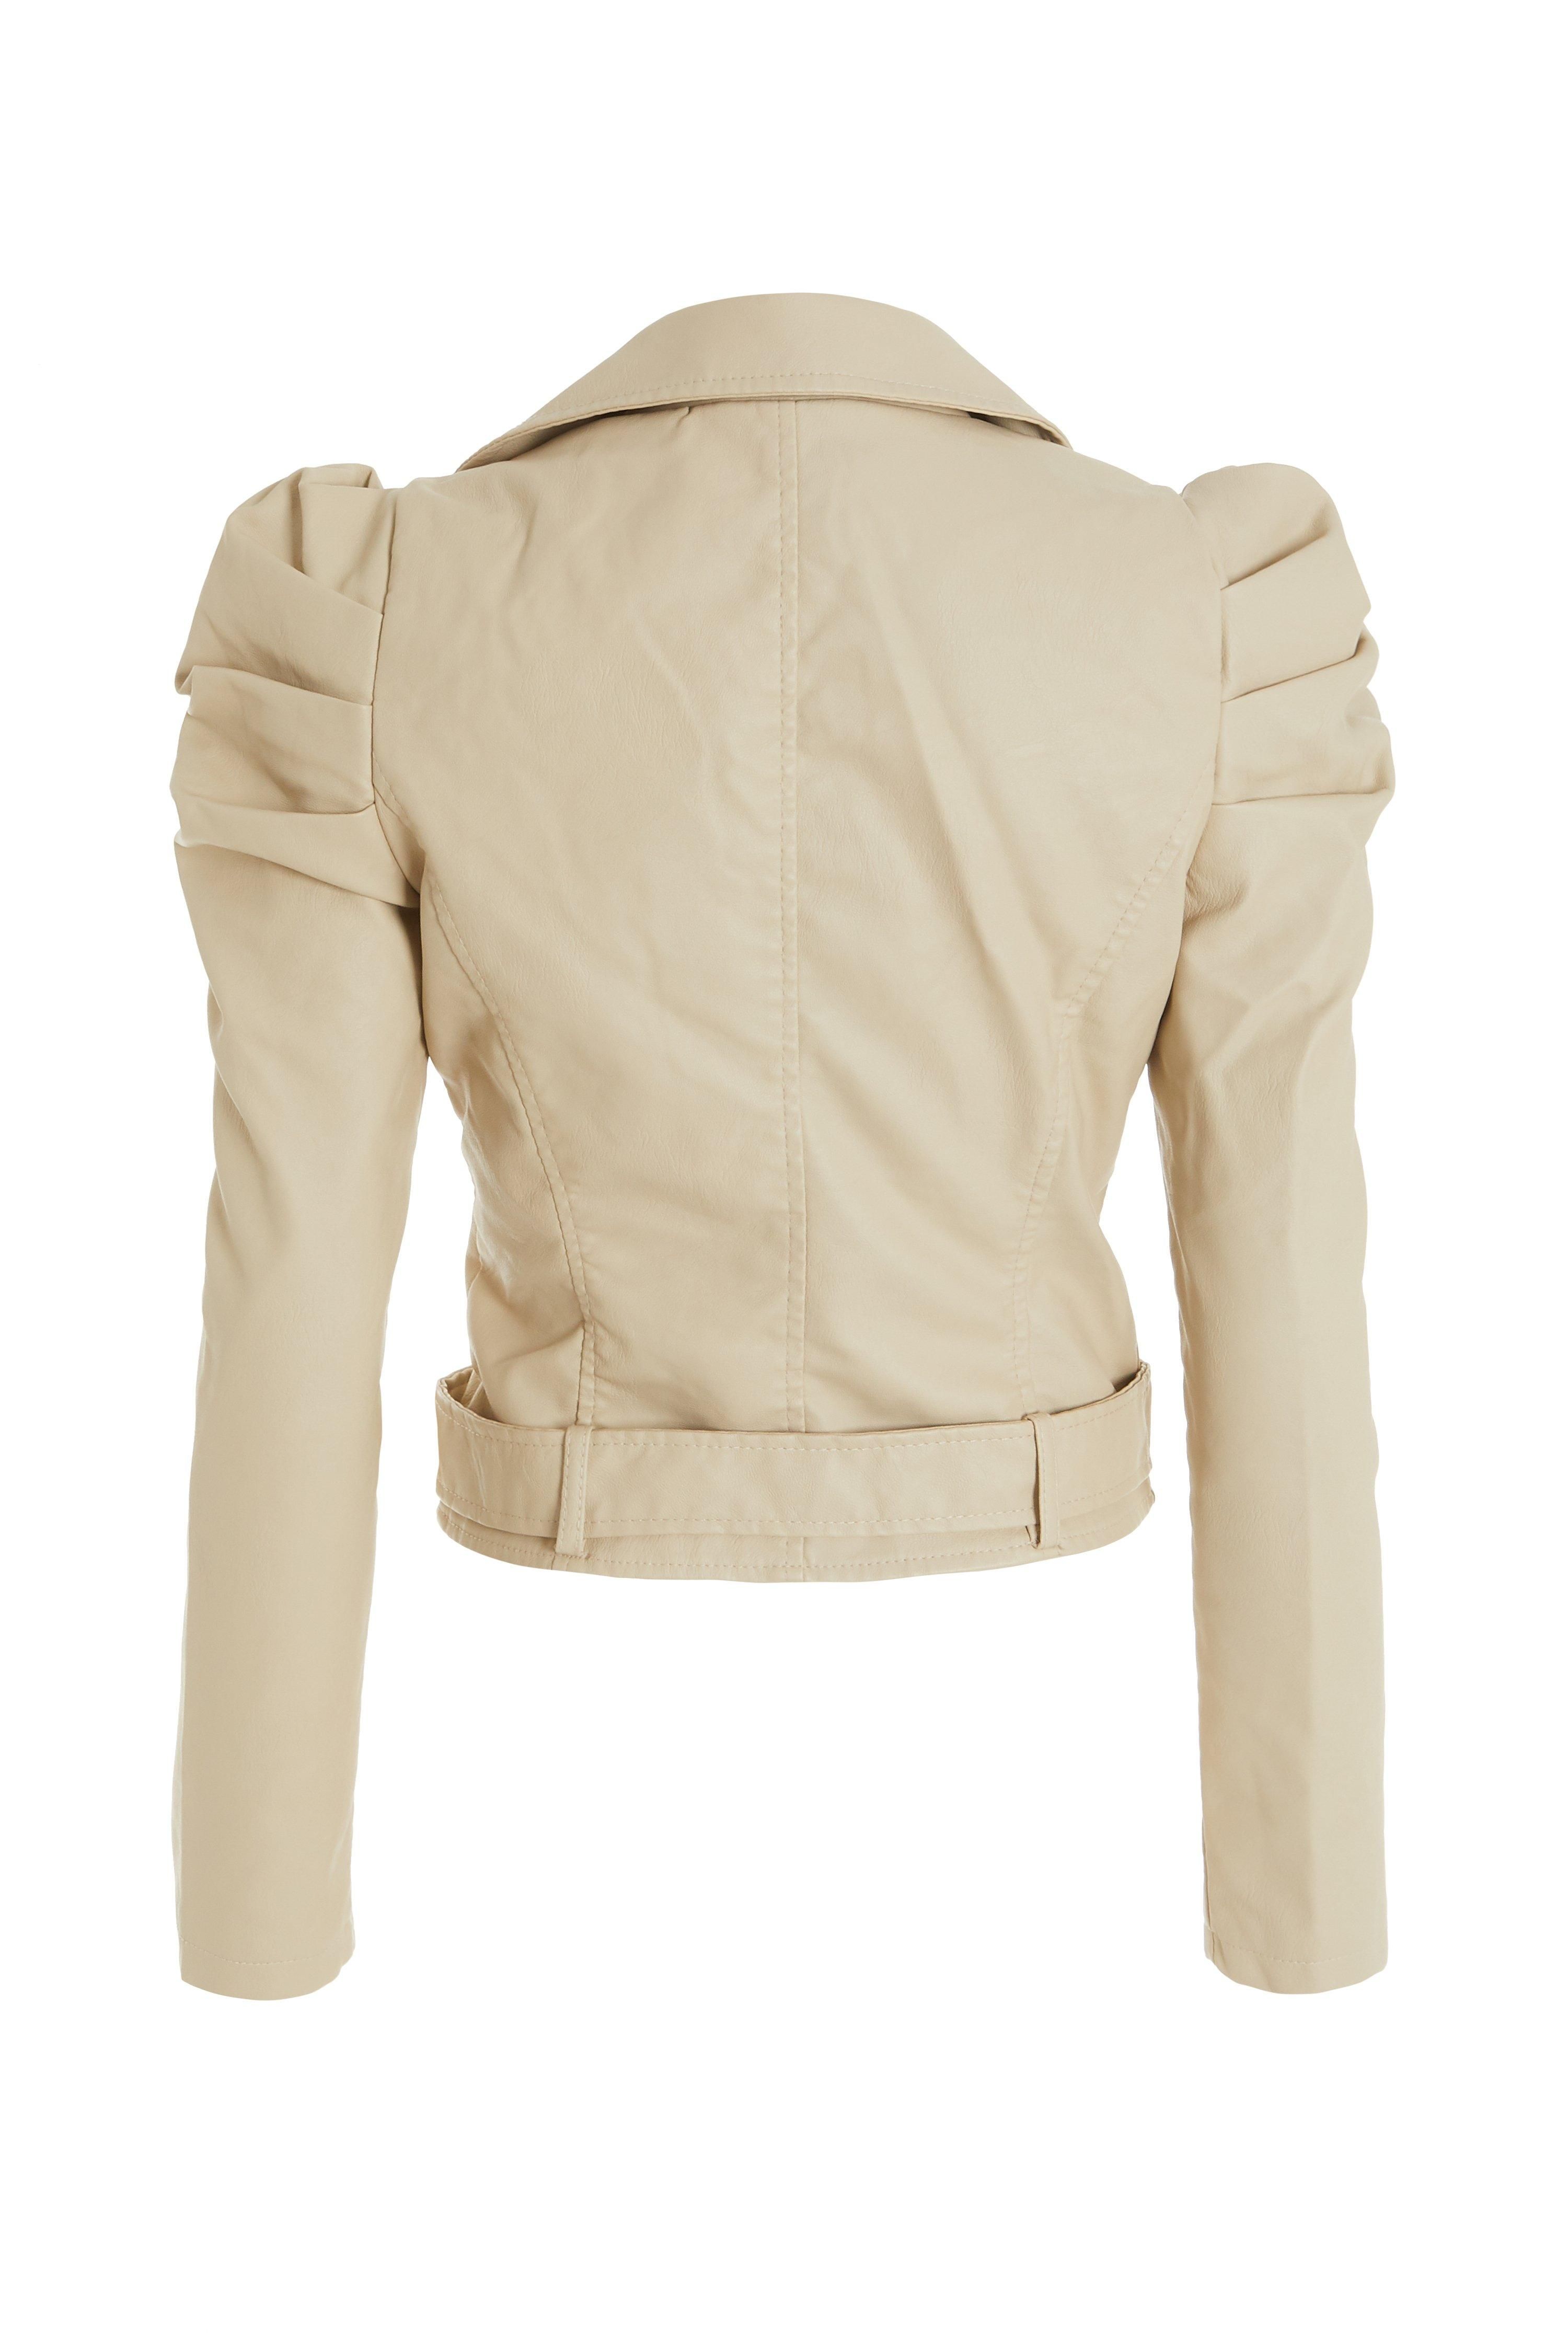 - Faux leather  - Puff sleeve  - Biker style   - Lapel front  - Length: 60cm approx